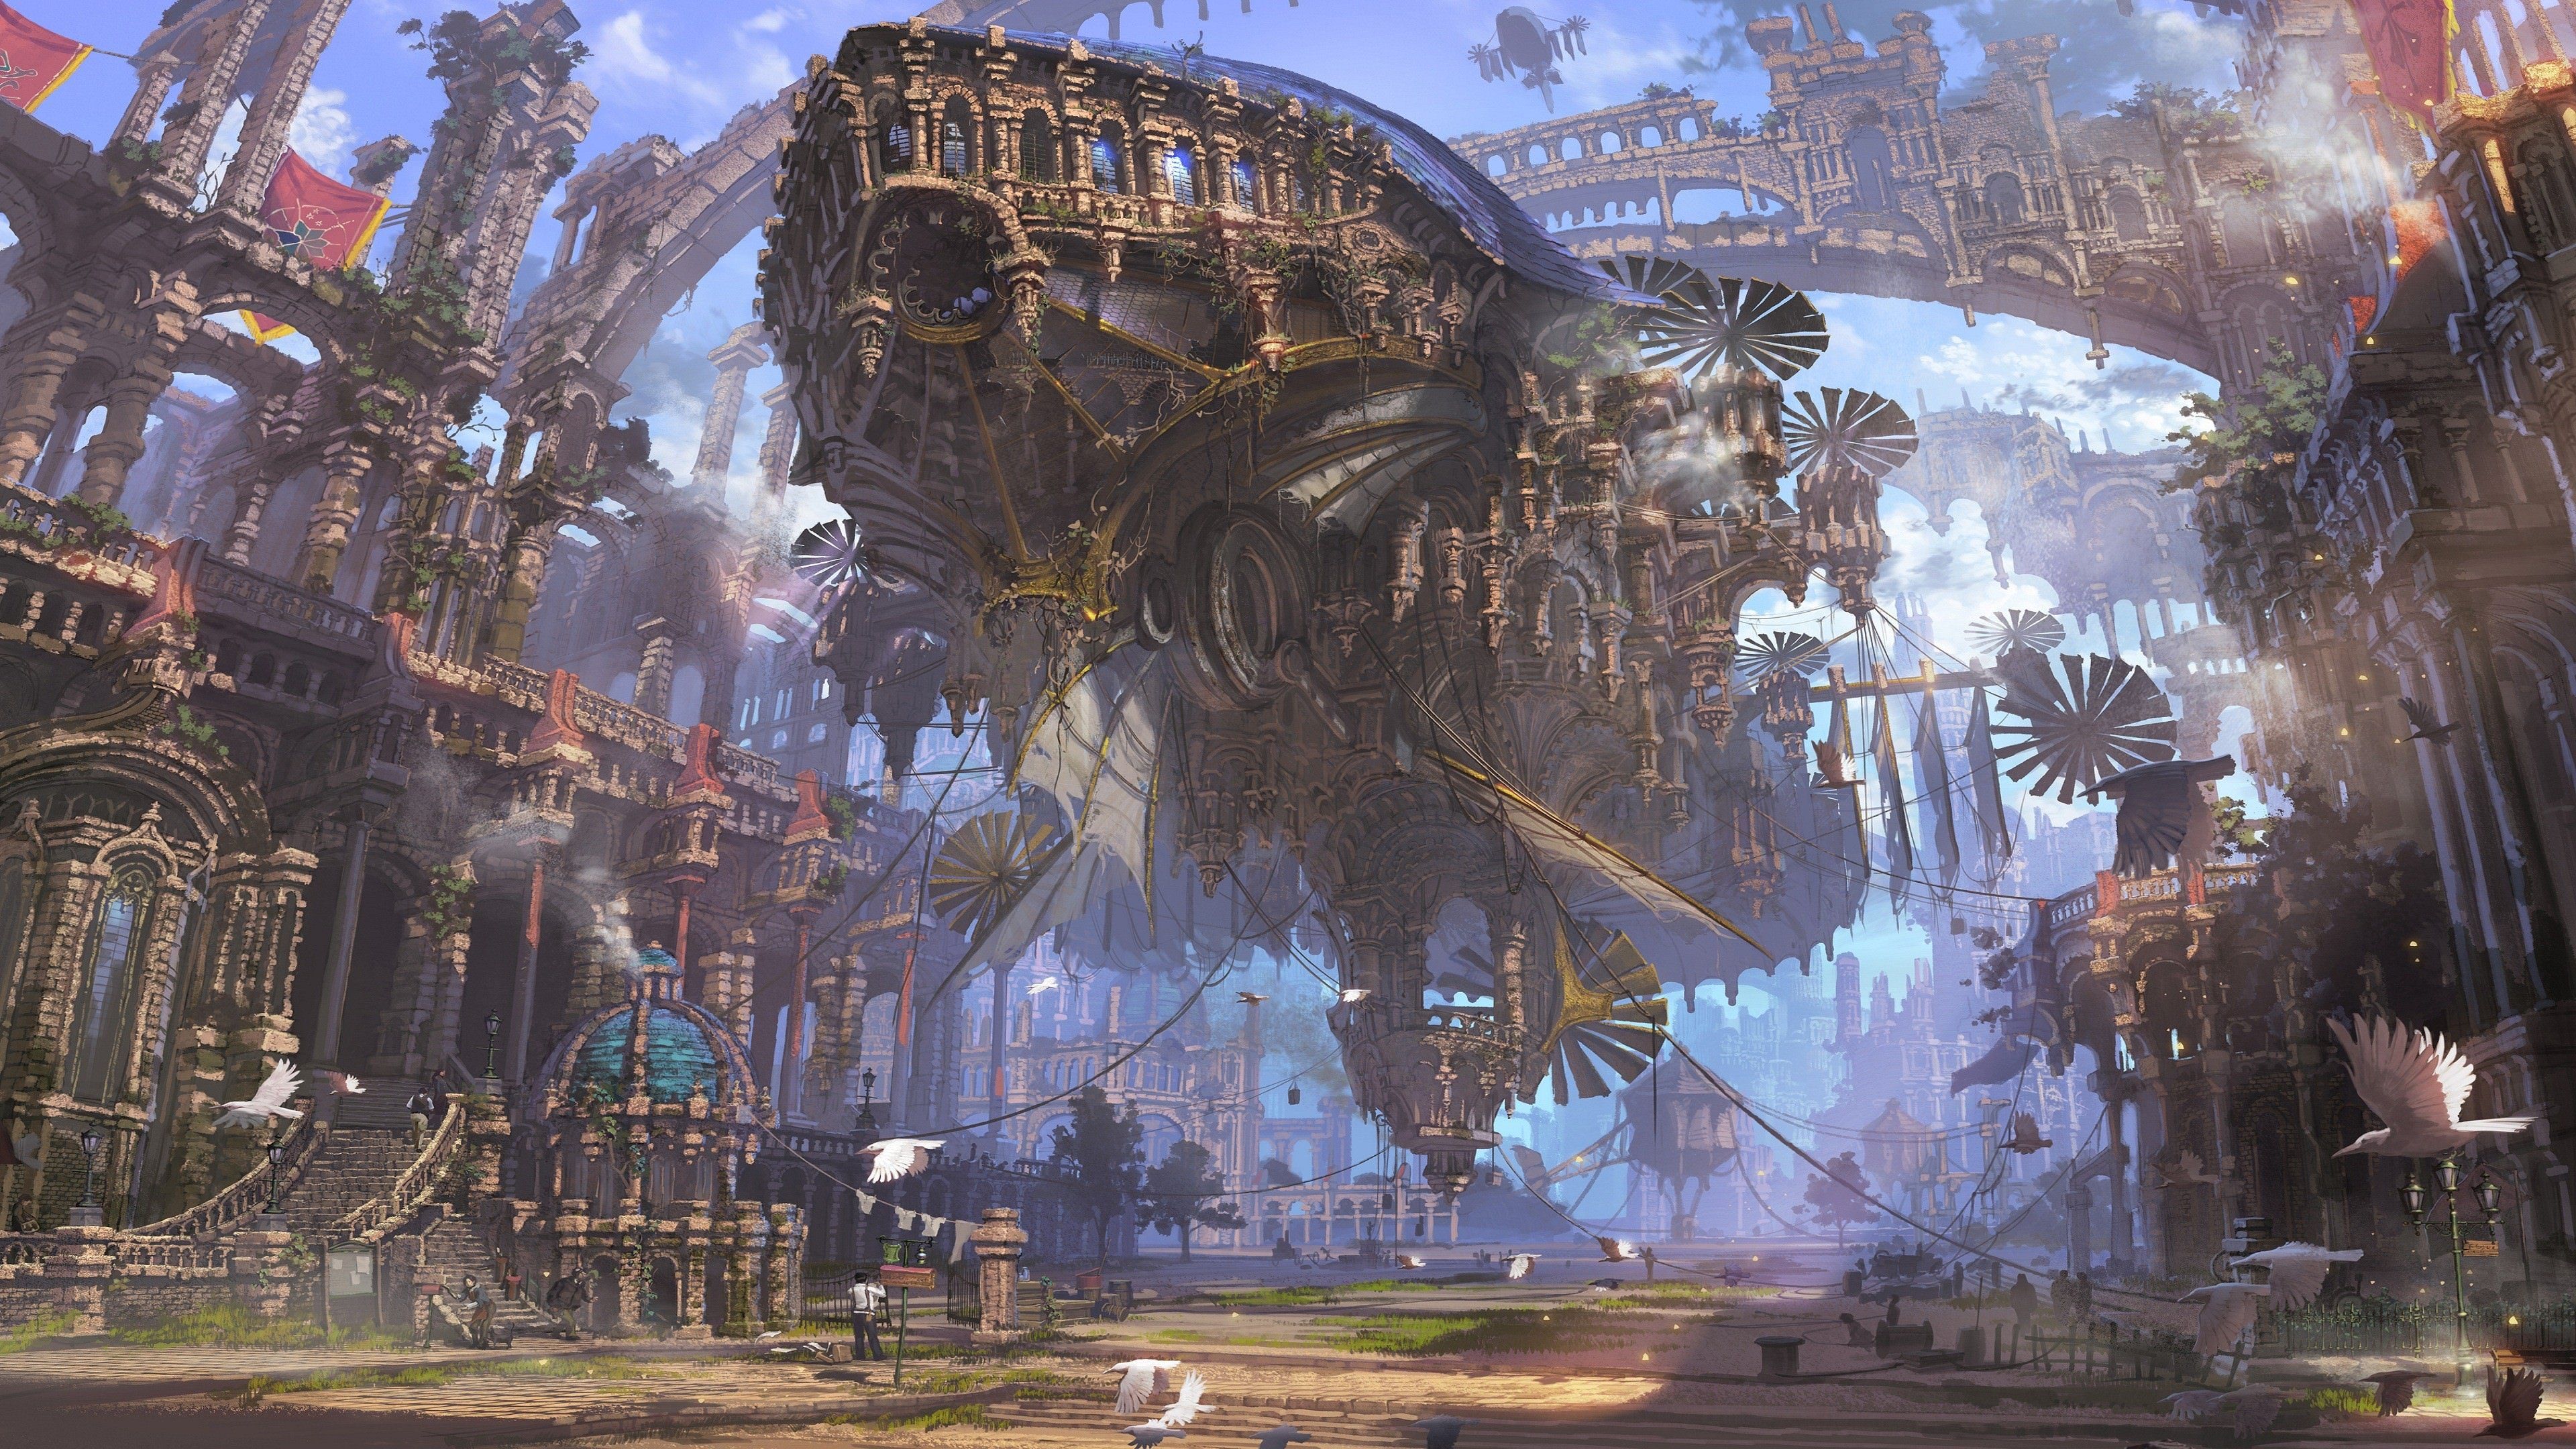 A large, dark airship hovers over a city with a sky background - Steampunk